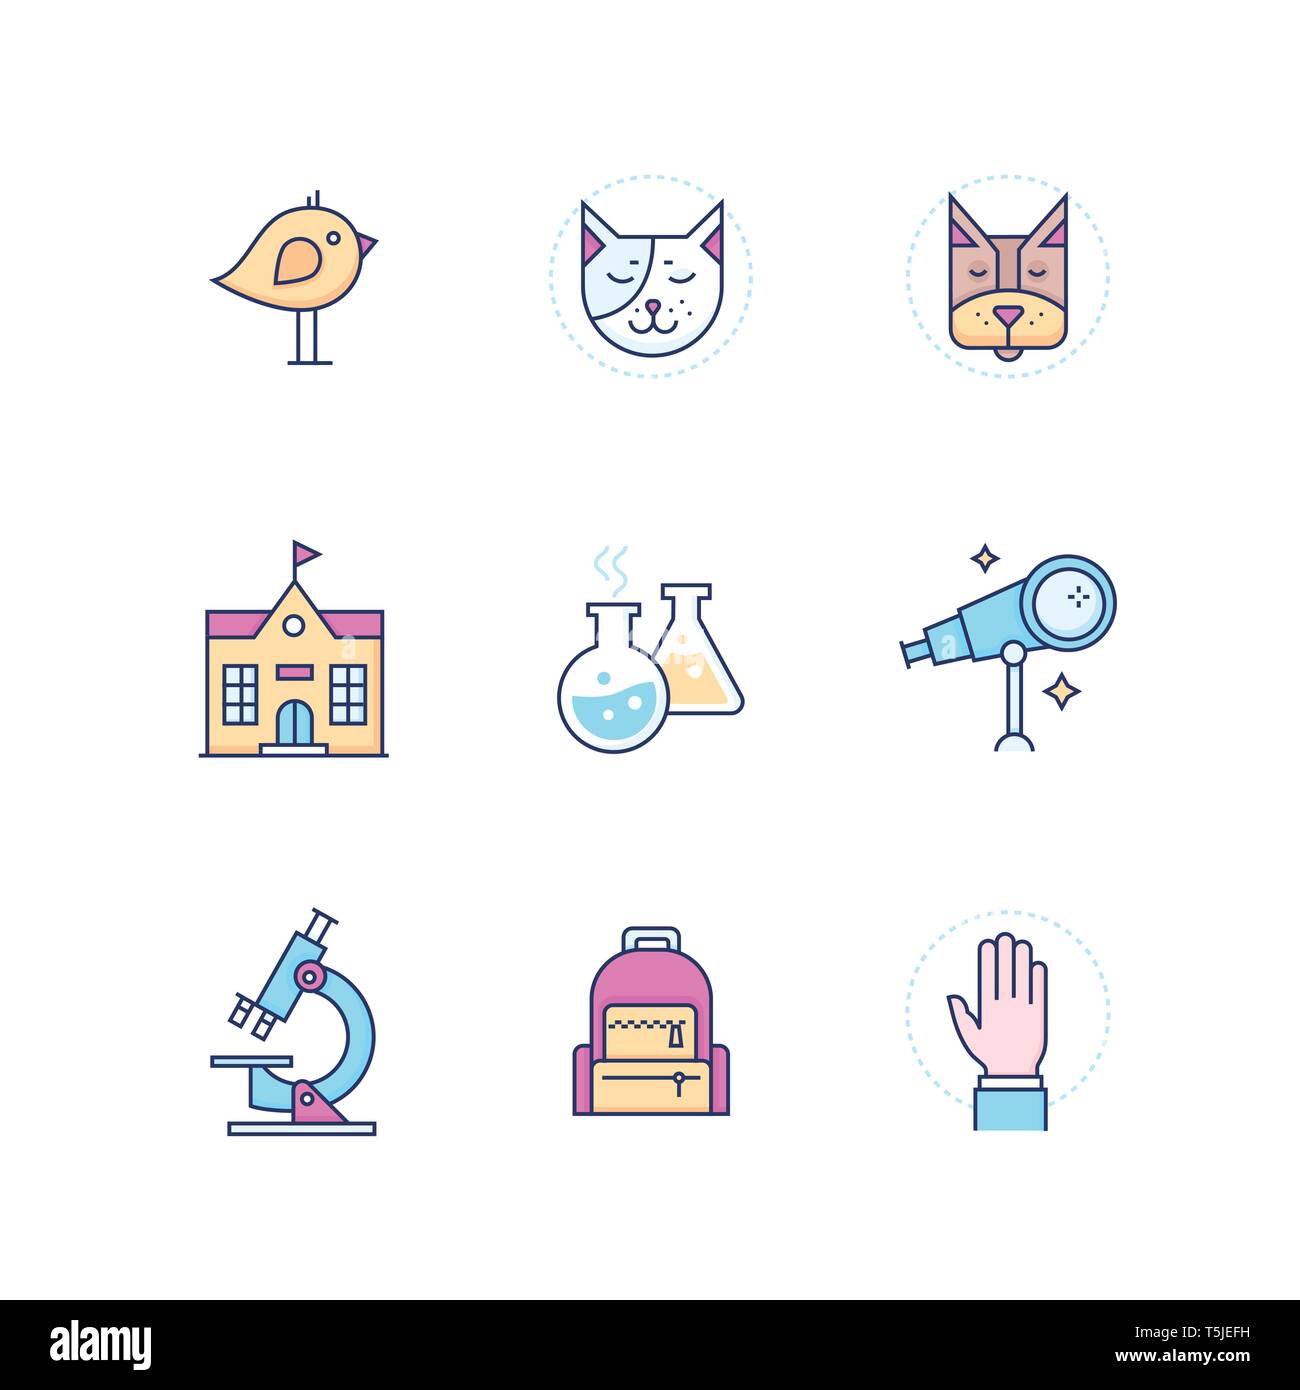 School concepts - modern line design style icons set Stock Vector